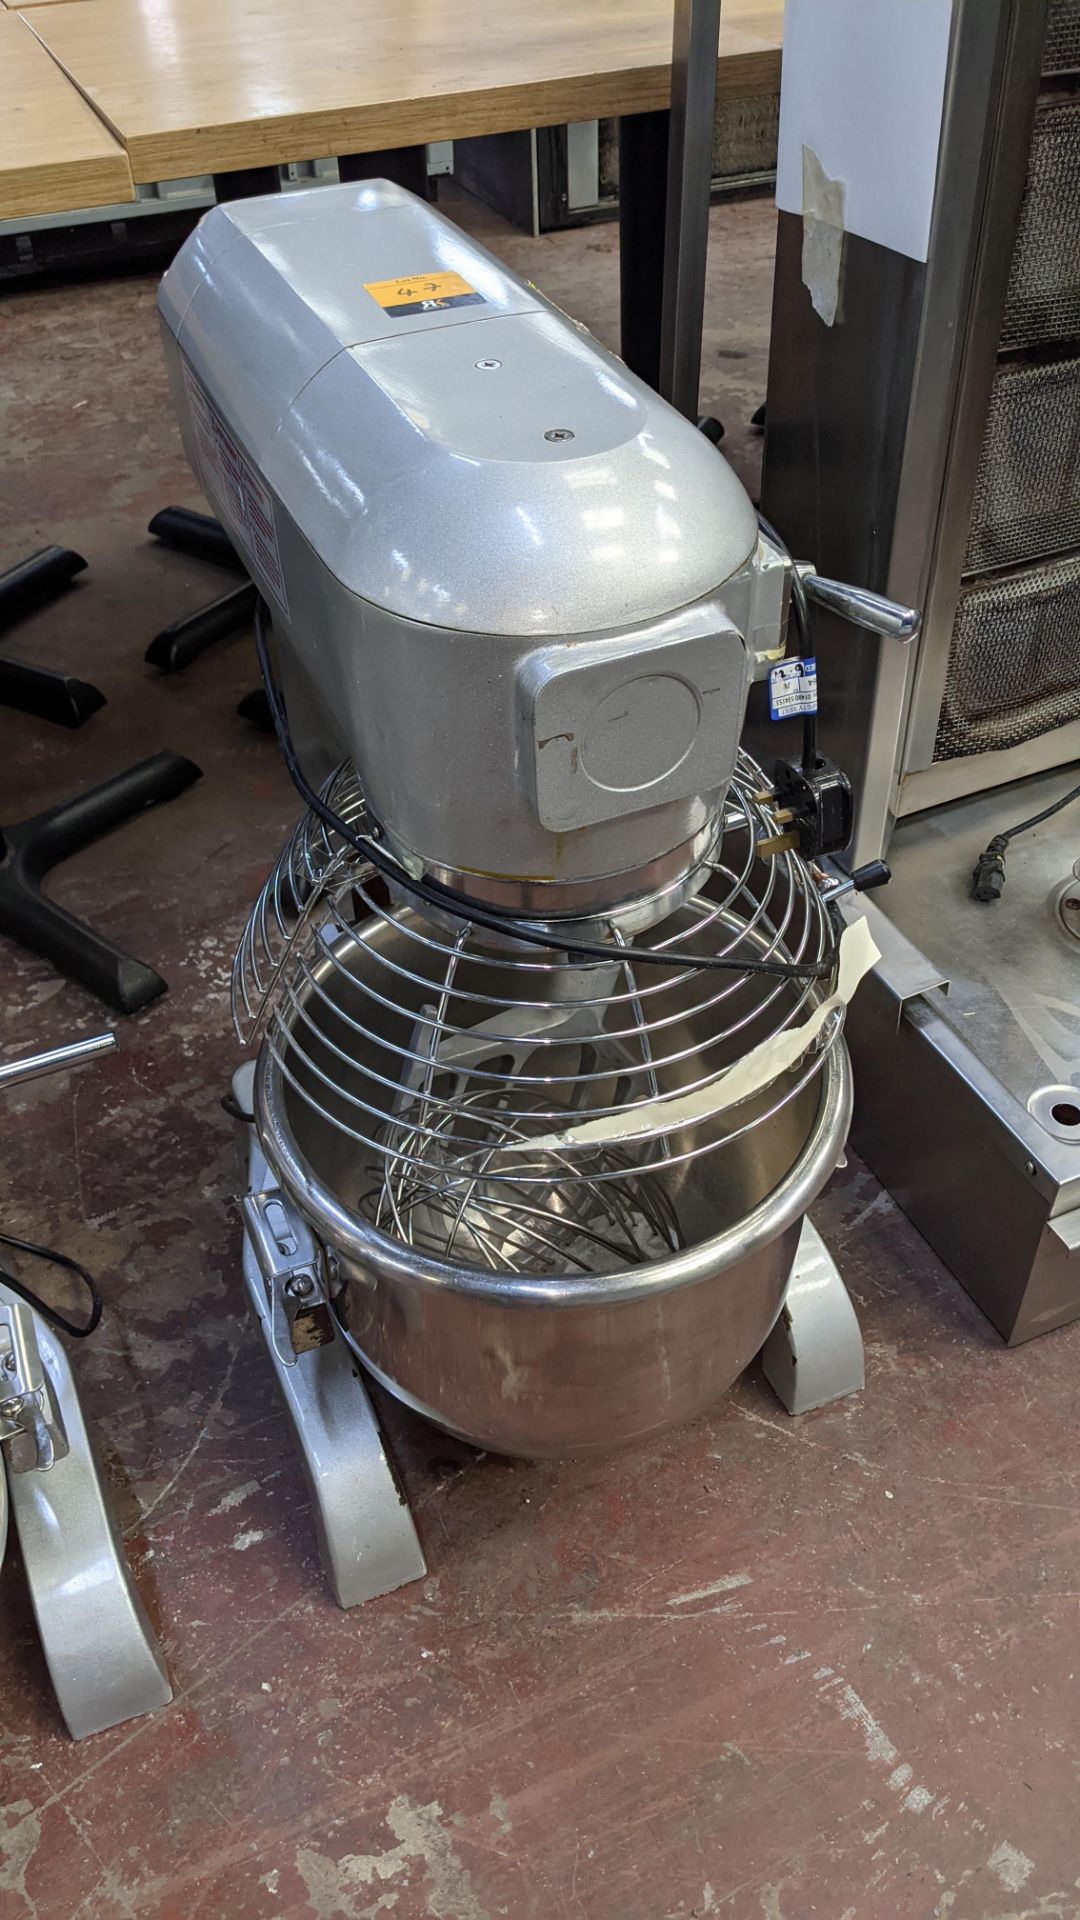 Pantheon model B200 heavy-duty commercial mixer including removable bowl, paddle & whisk - Image 6 of 8